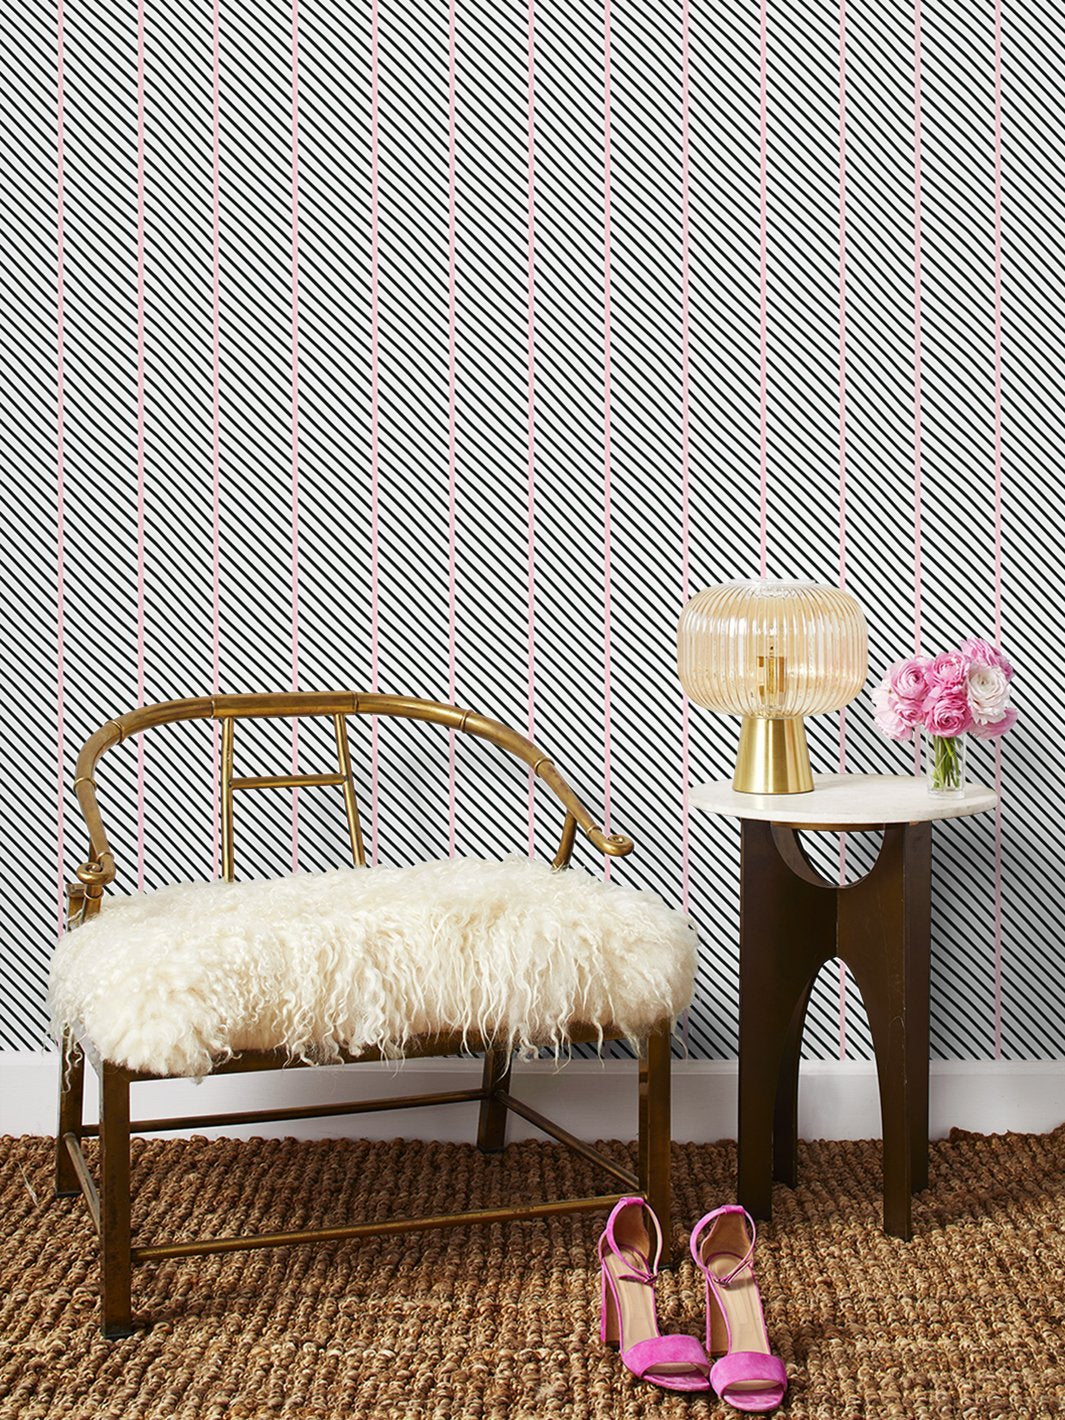 'Barbie™ Dreamhouse Stripes' Wallpaper by Barbie™ - Charcoal Pink